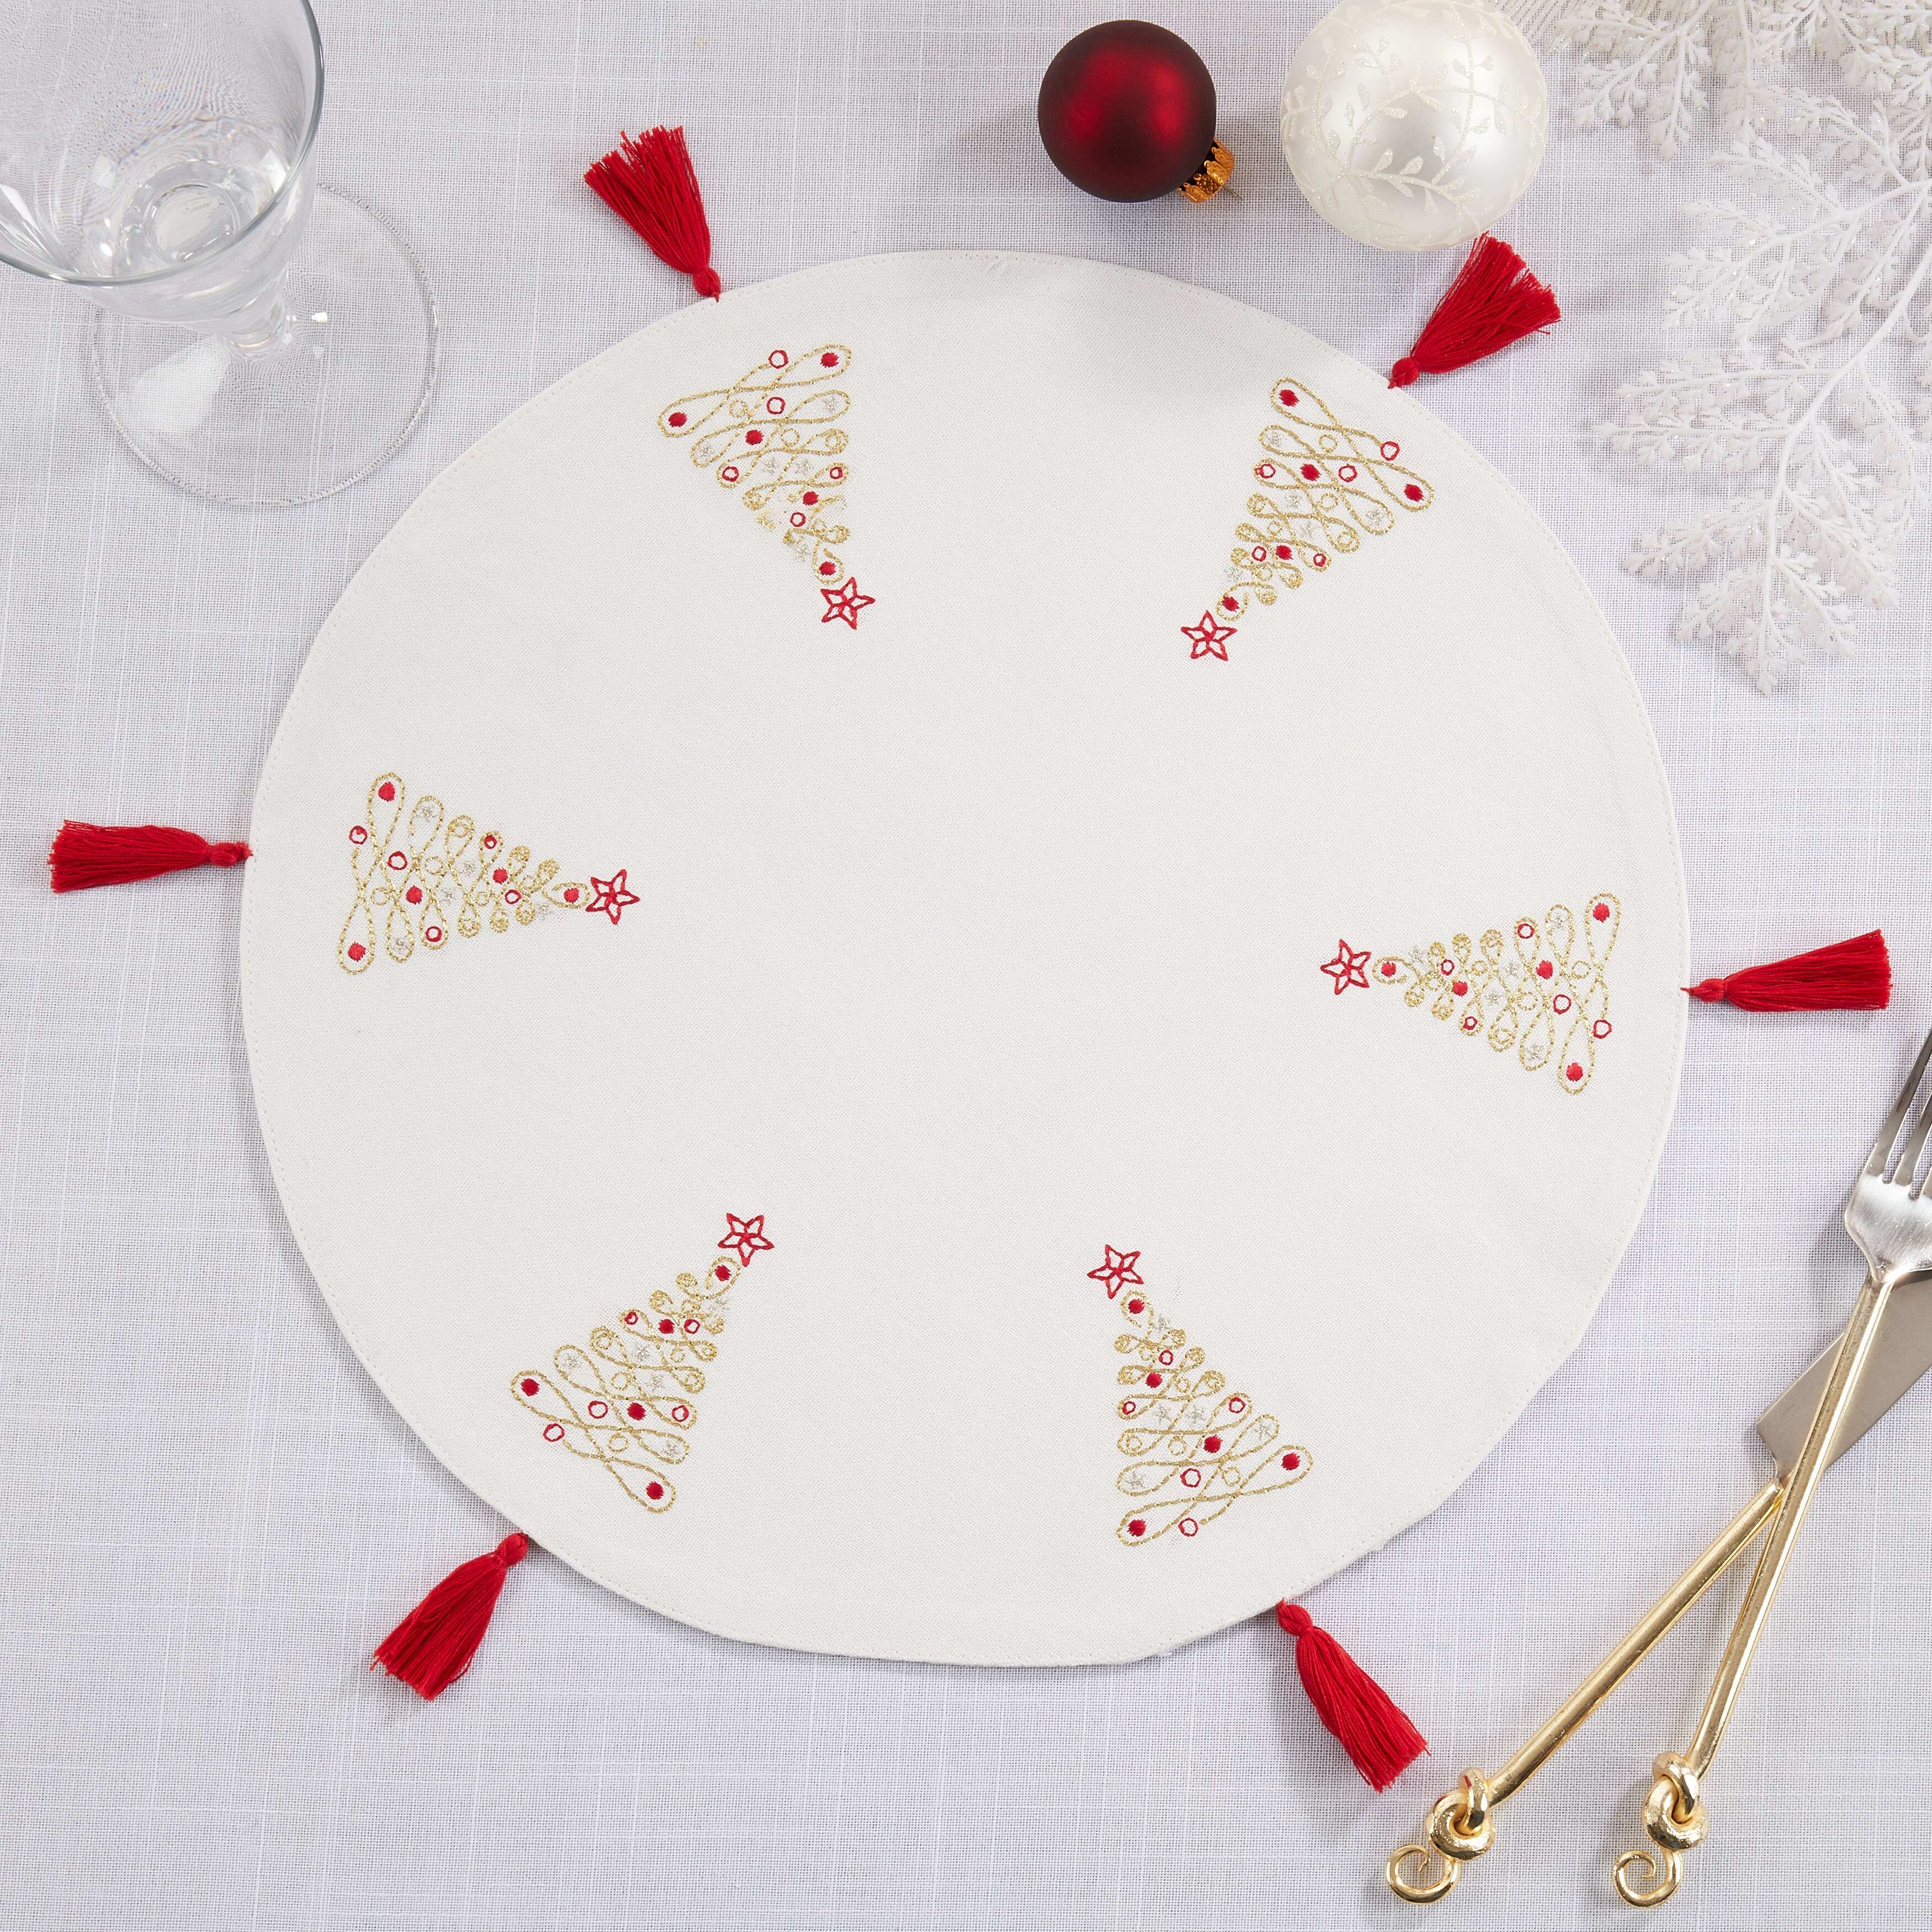 Embroidered Placemats With Christmas Trees Design (Set of 4)